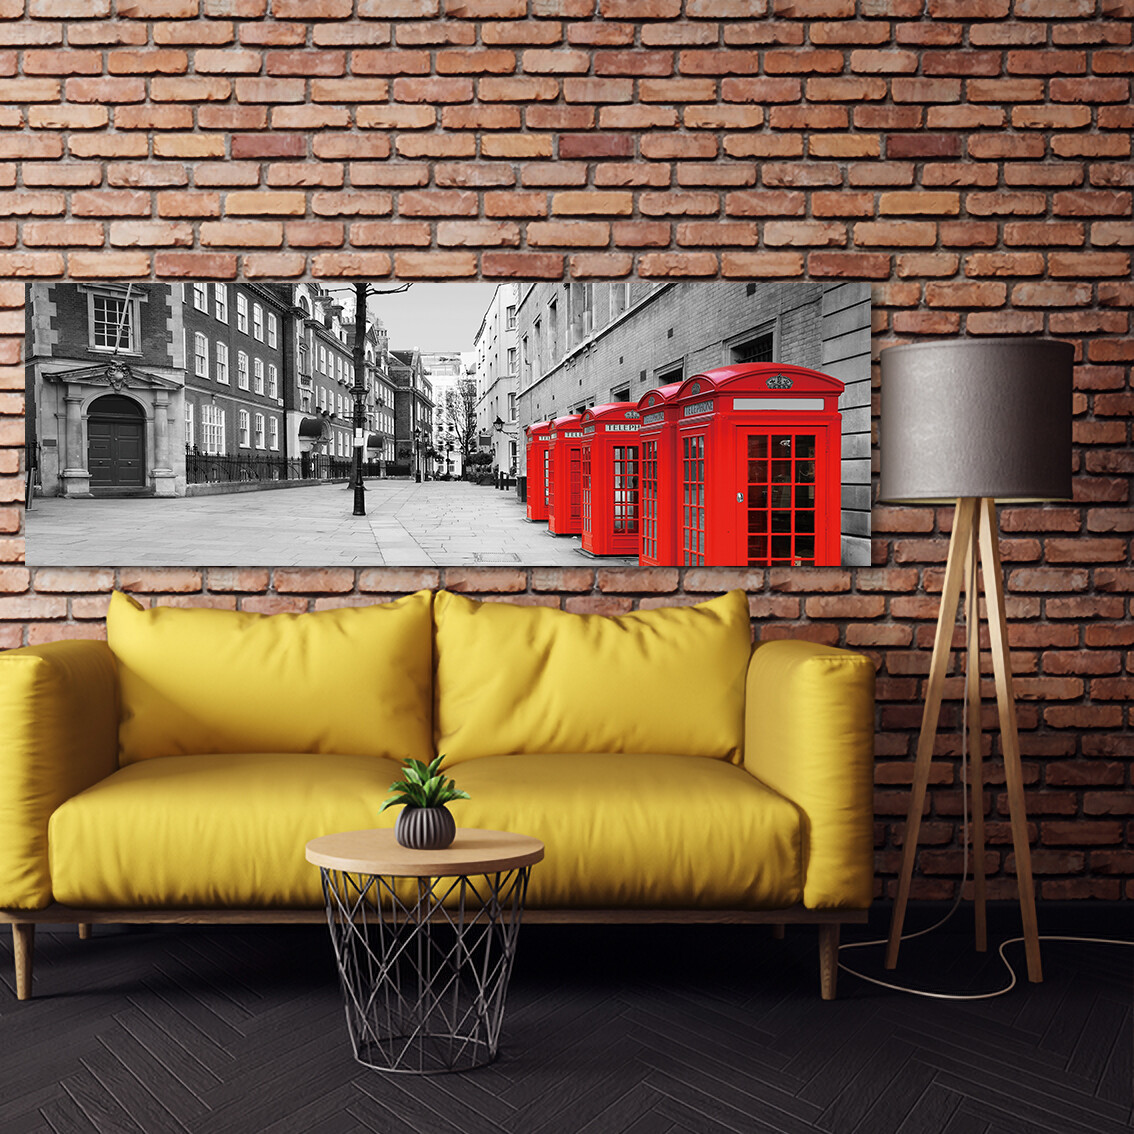 London Red Telephone Booth - Modern Luxury Wall art Printed on Acrylic Glass - Frameless and Ready to Hang